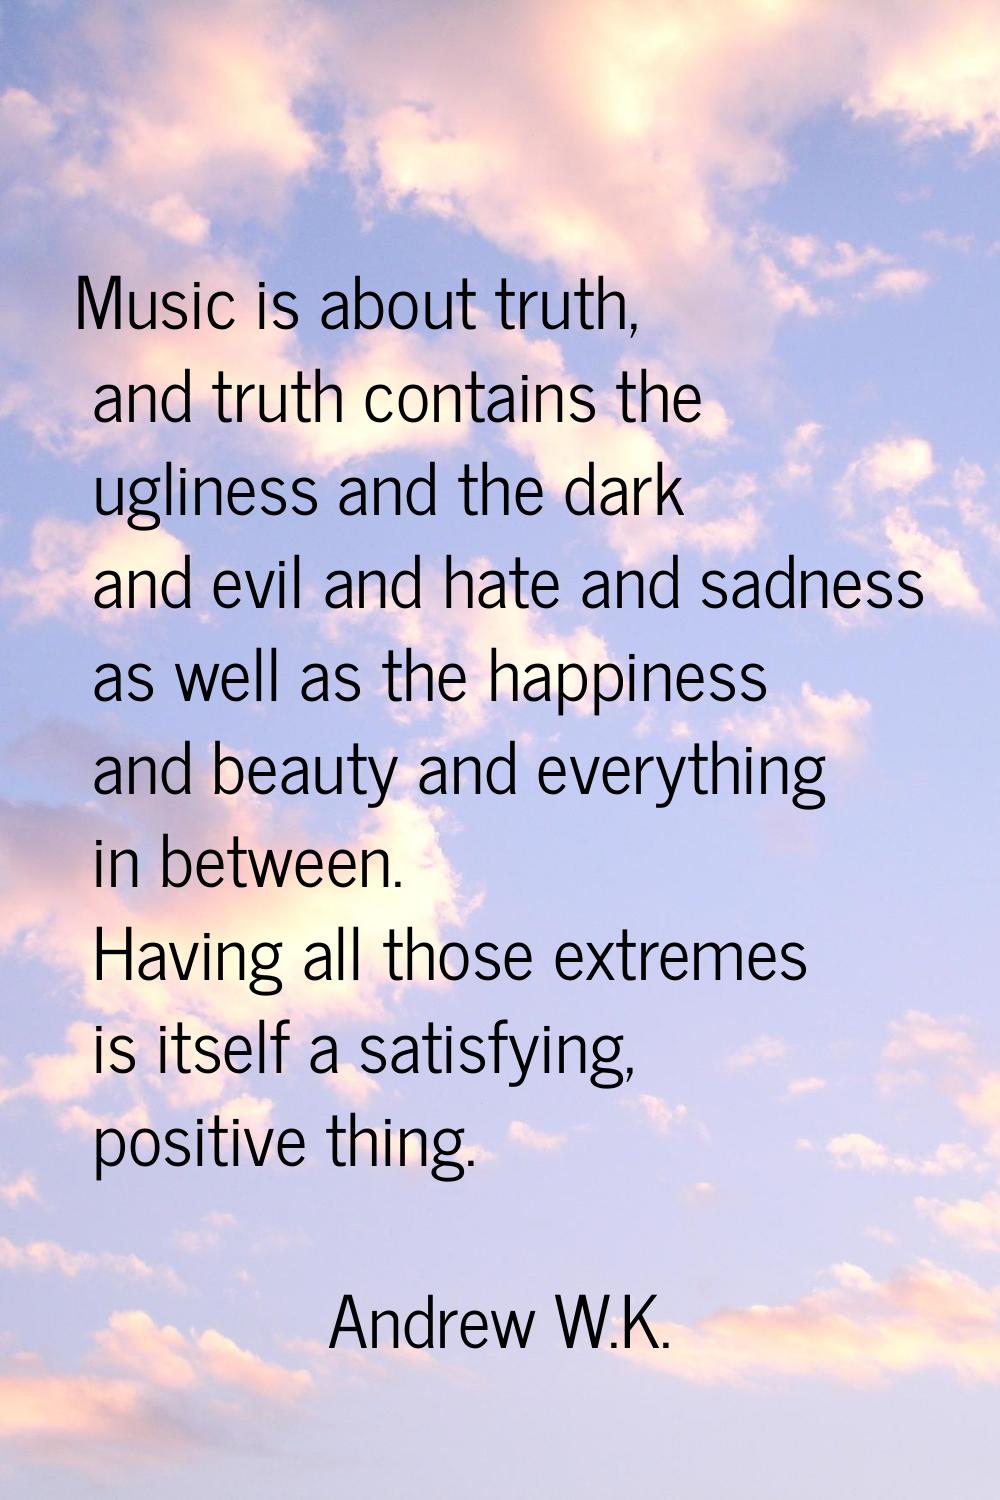 Music is about truth, and truth contains the ugliness and the dark and evil and hate and sadness as